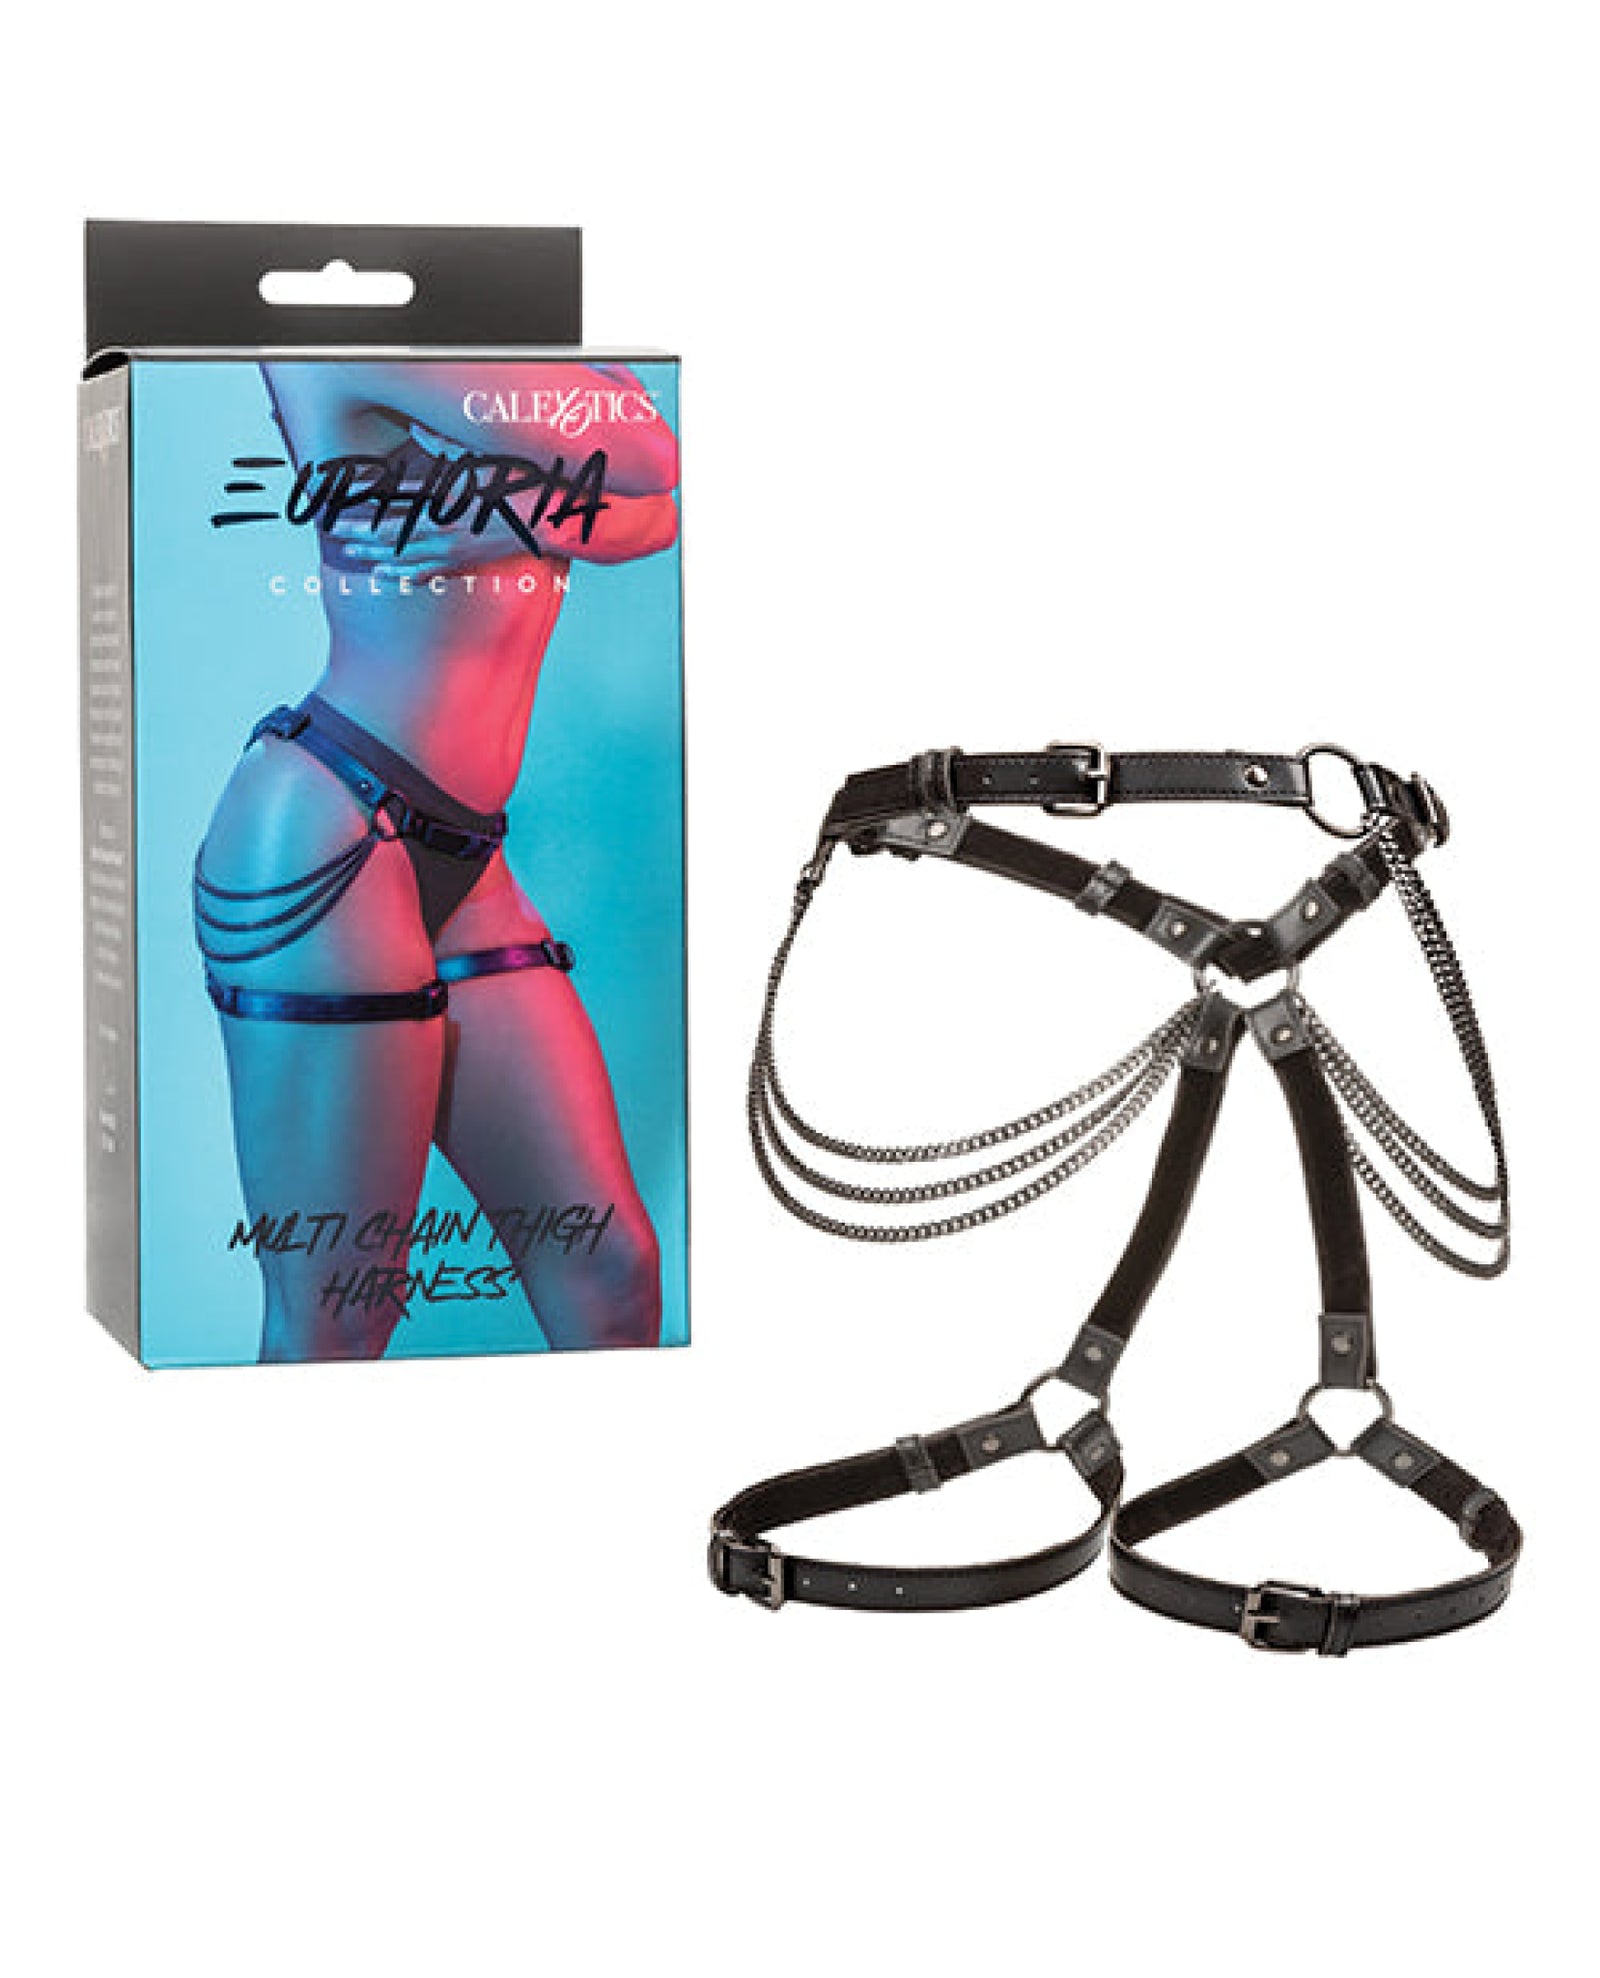 Euphoria Collection Multi Chain Thigh Harness California Exotic Novelties